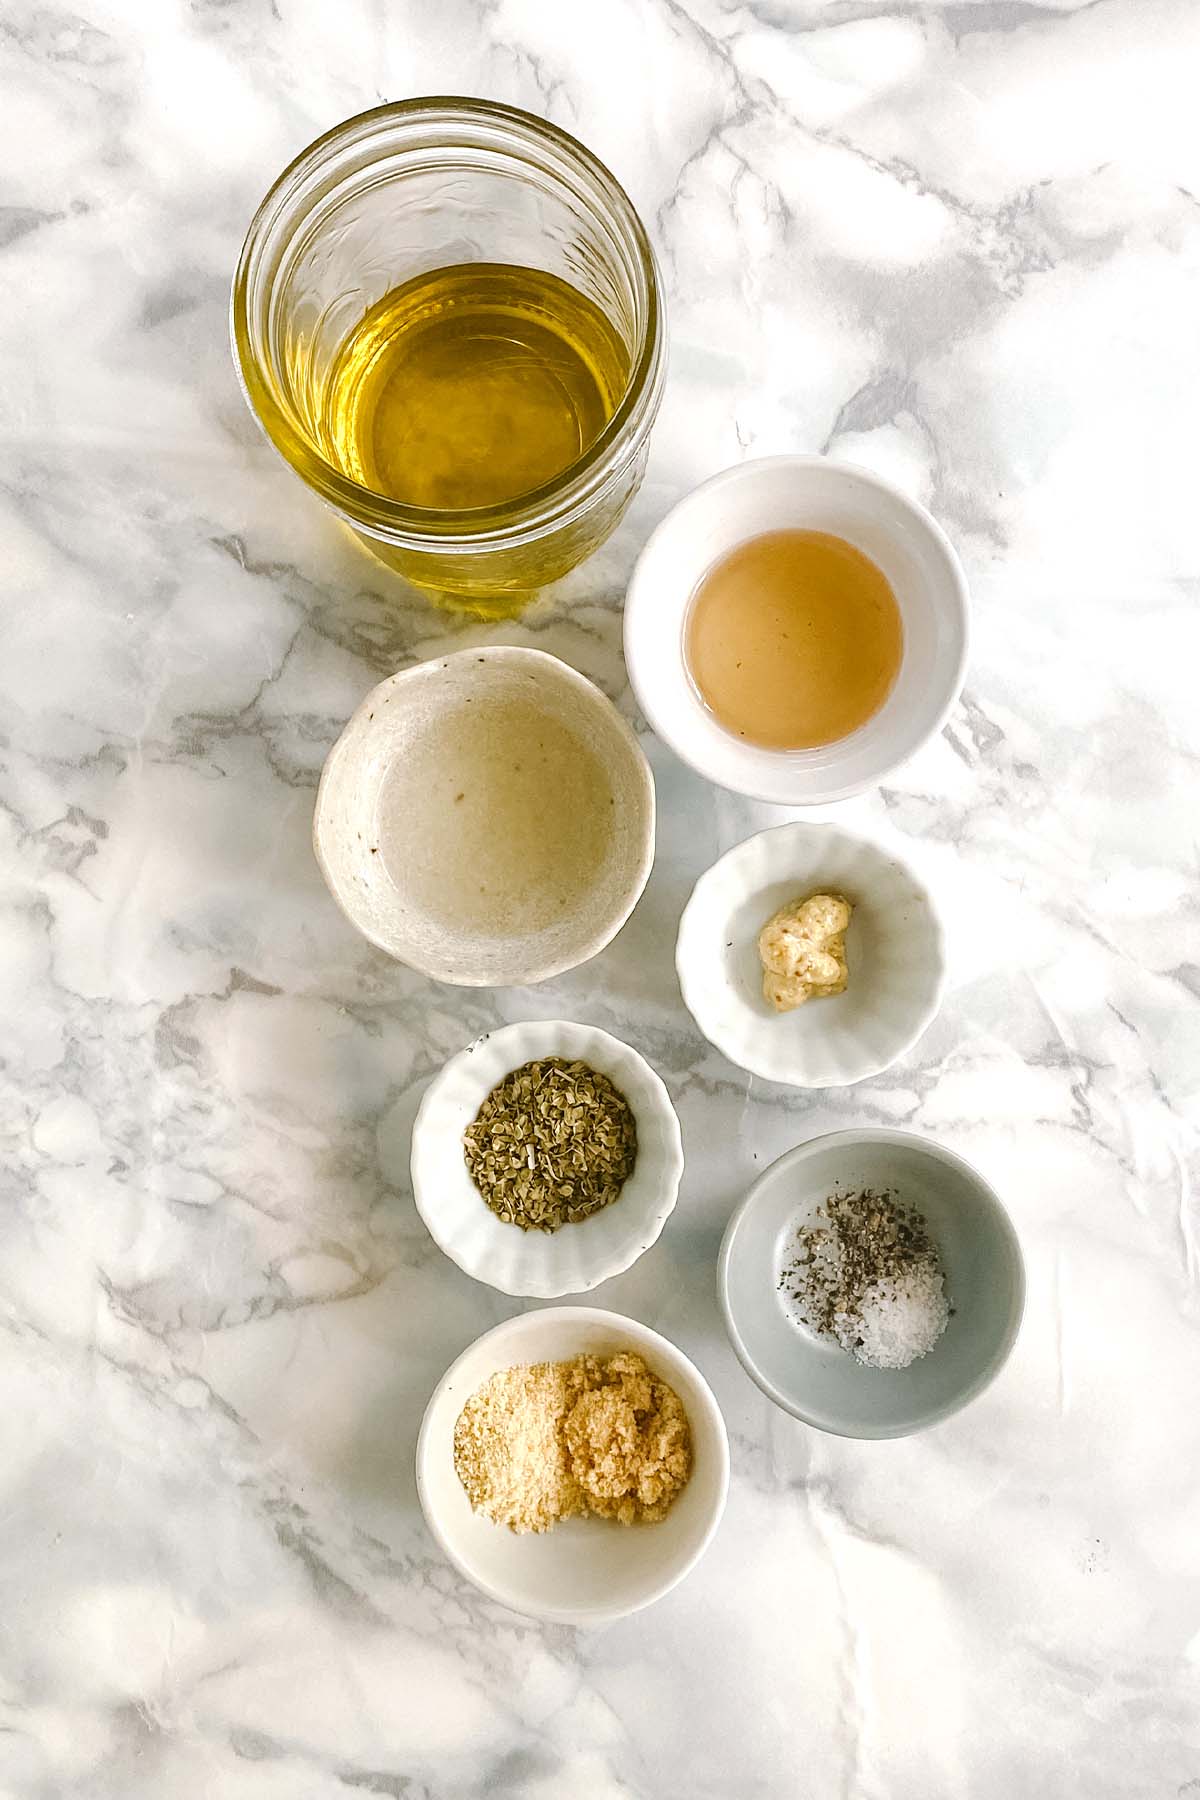 Ingredients for greek dressing in small bowls on a white marble counter.